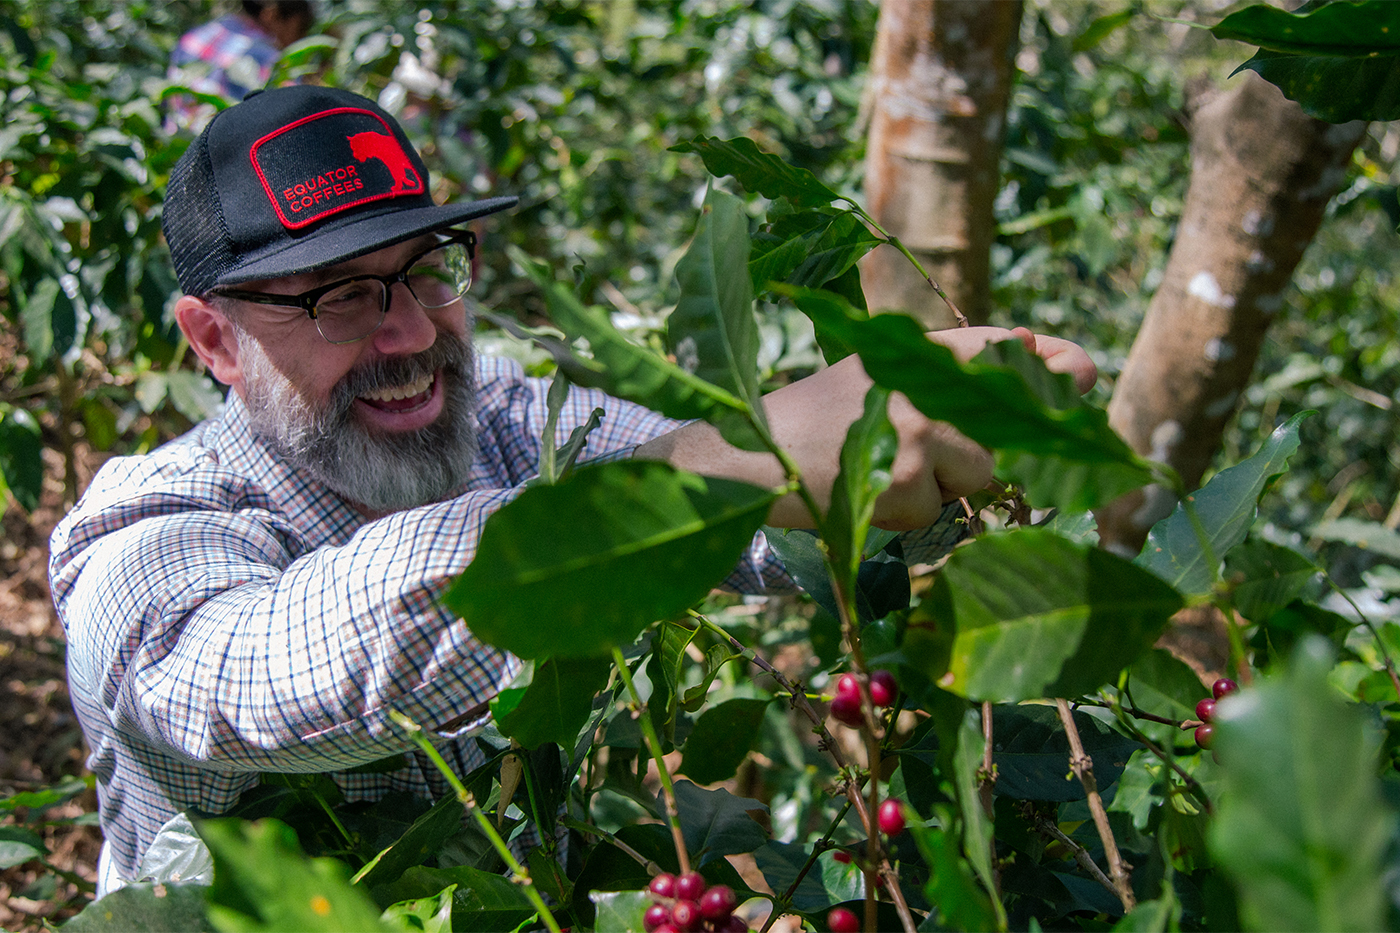 A person wearing an Equator Coffees branded hat picking coffee beans.